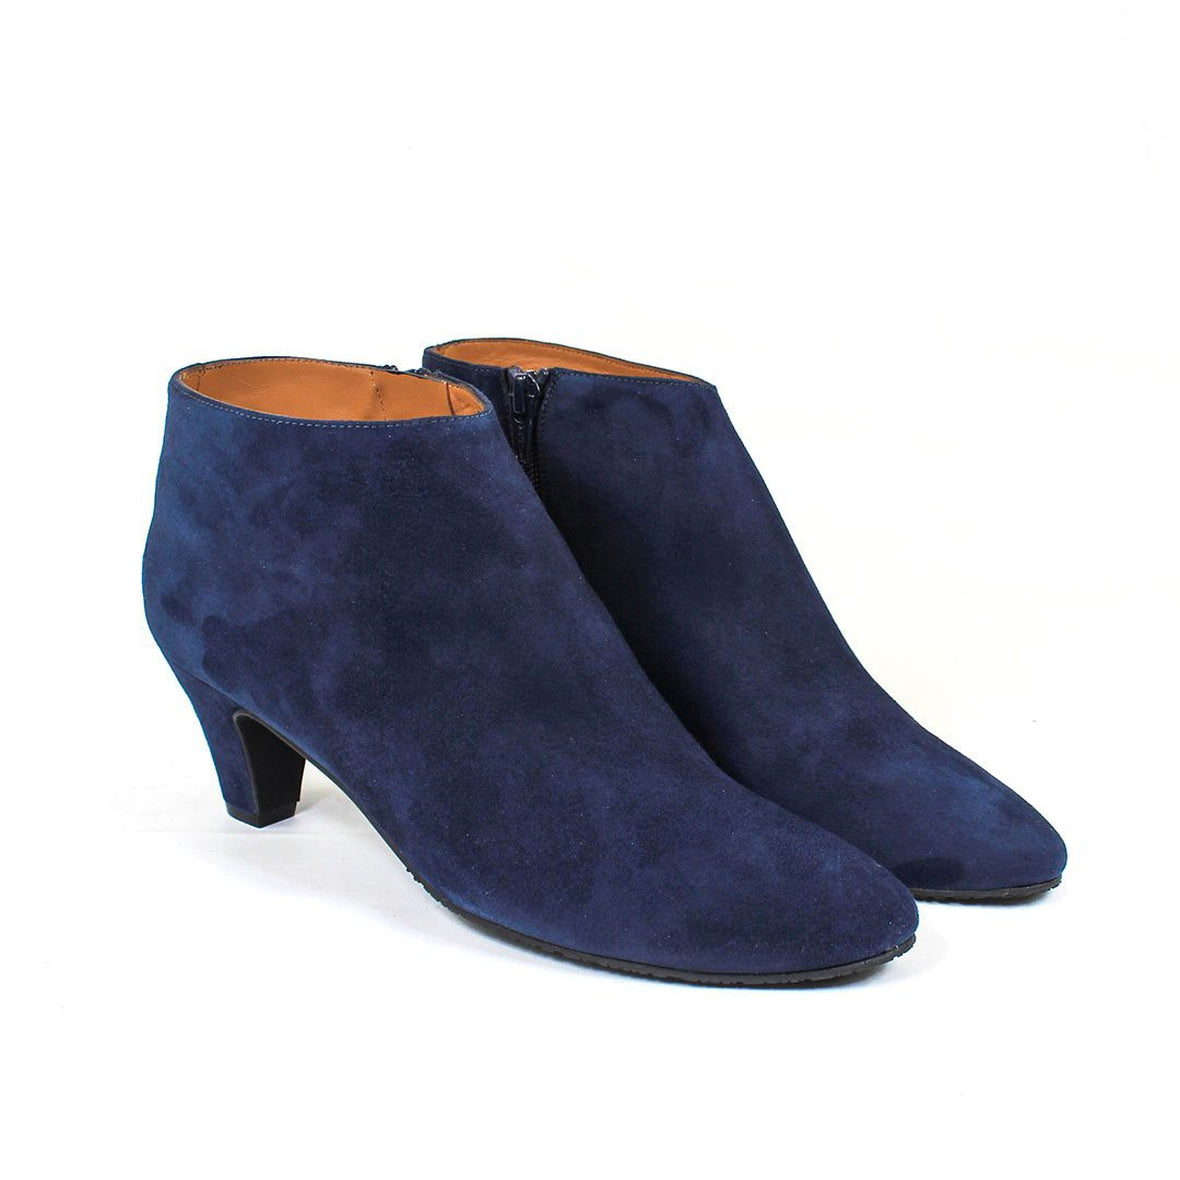 ELIPE Navy Blue Leather Suede